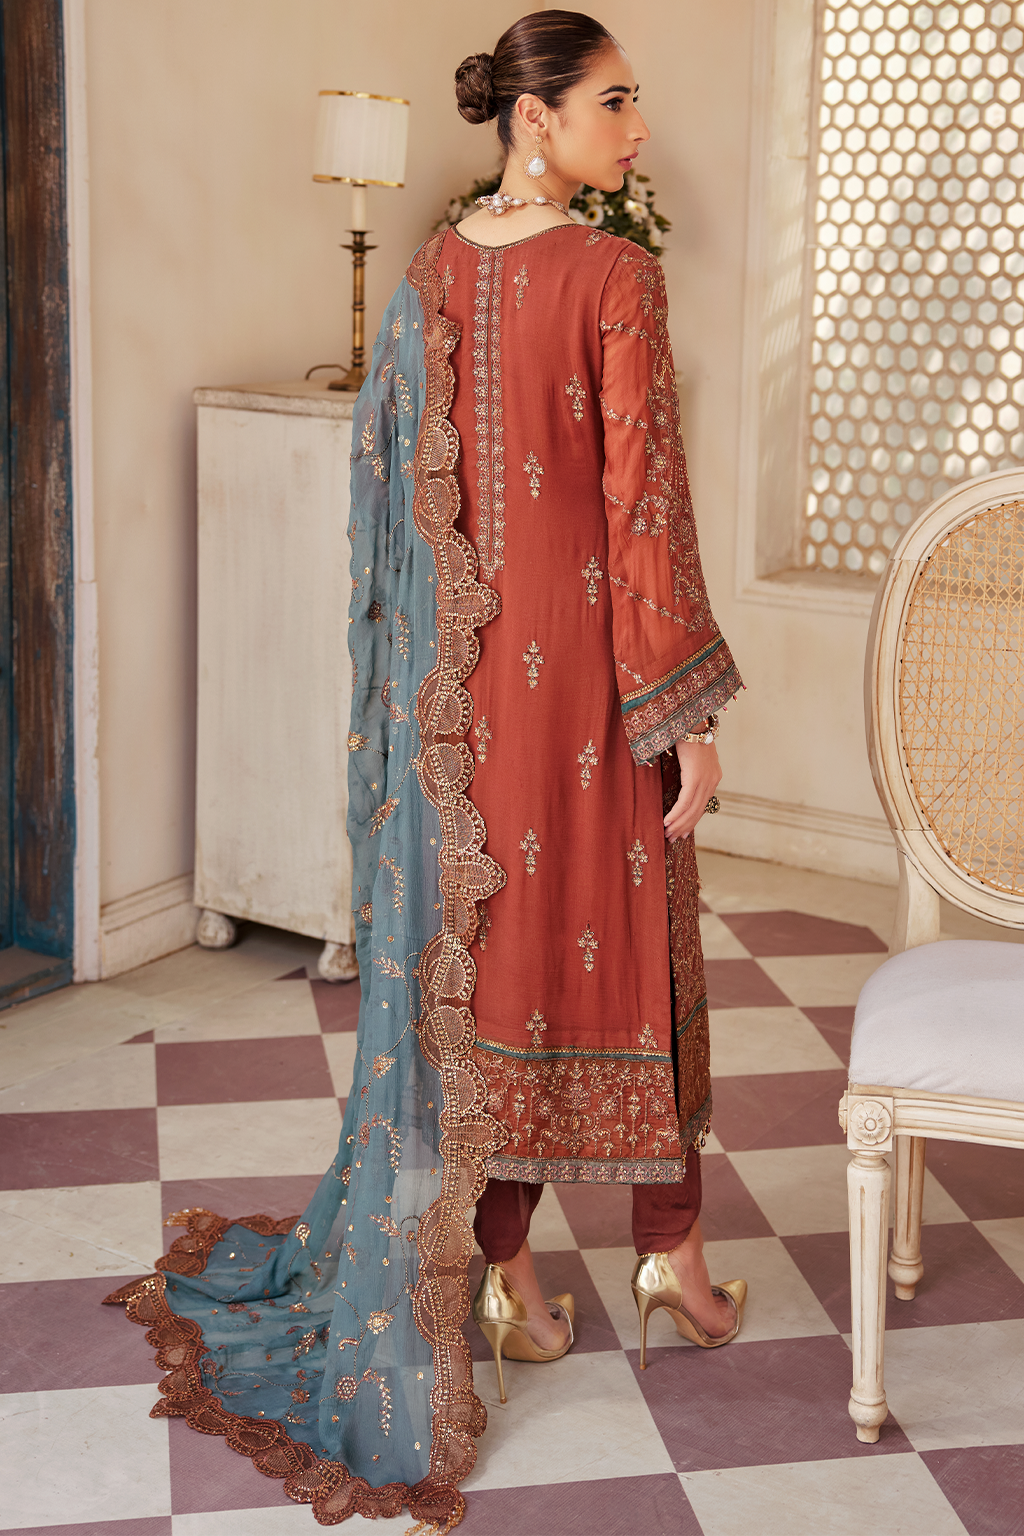 Luxe Chiffon by Emaan Adeel (LX 07)